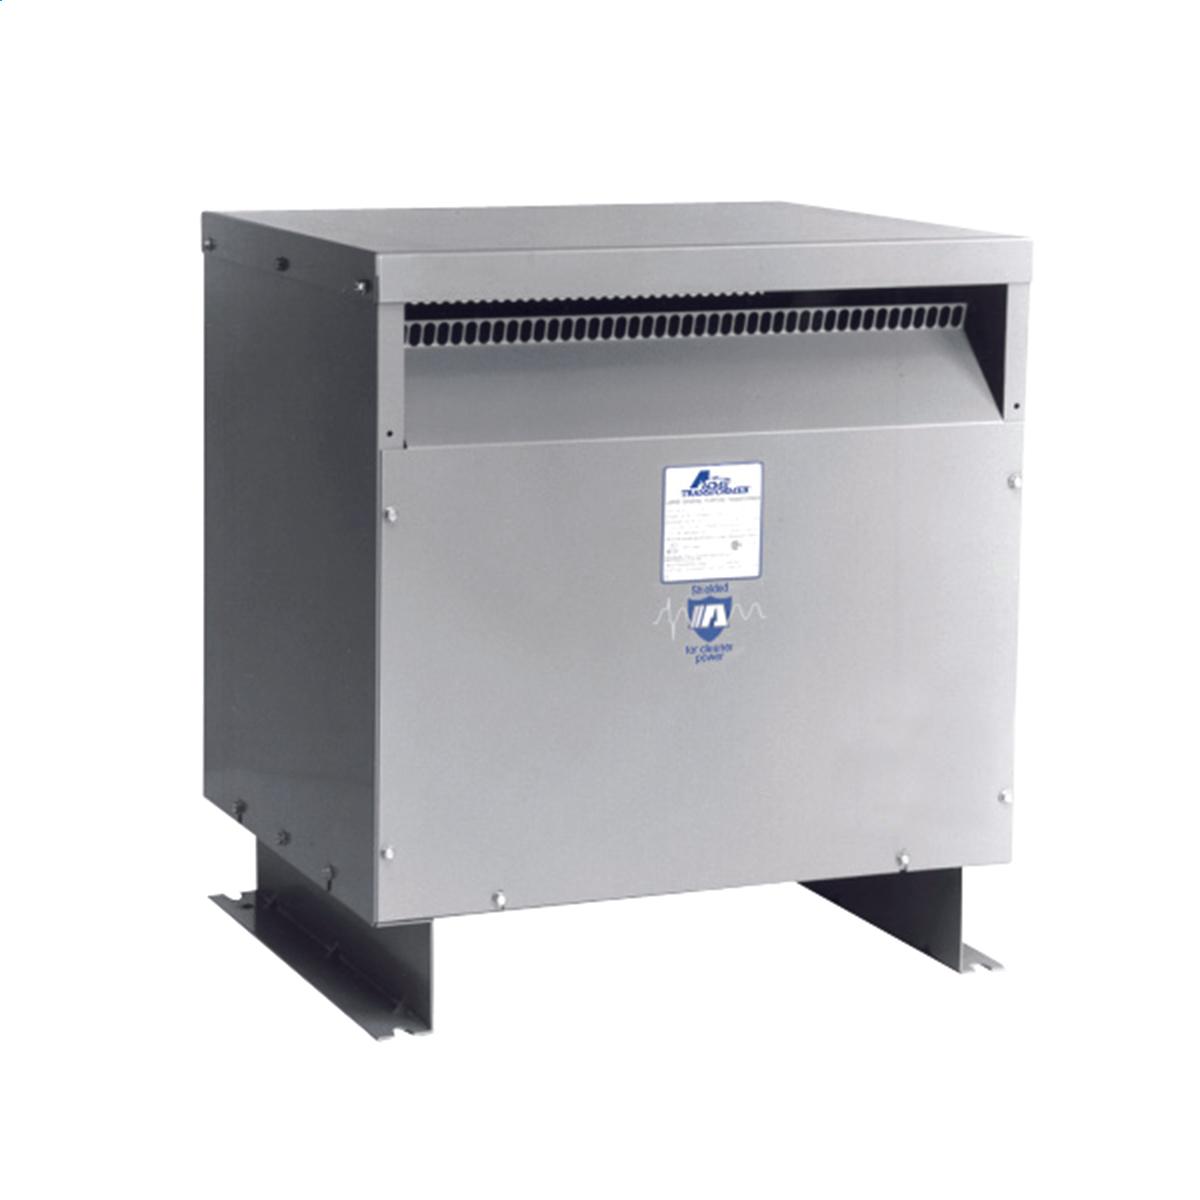 Hubbell WB015K06 Medium Voltage Transformer - Single Phase, 4160 - 600V, 15kVA  ; Lower operating cost over Liquid-filled ; No additional fireproofing or venting ; Long life expectancy ; Smaller, lighter easy to maintain